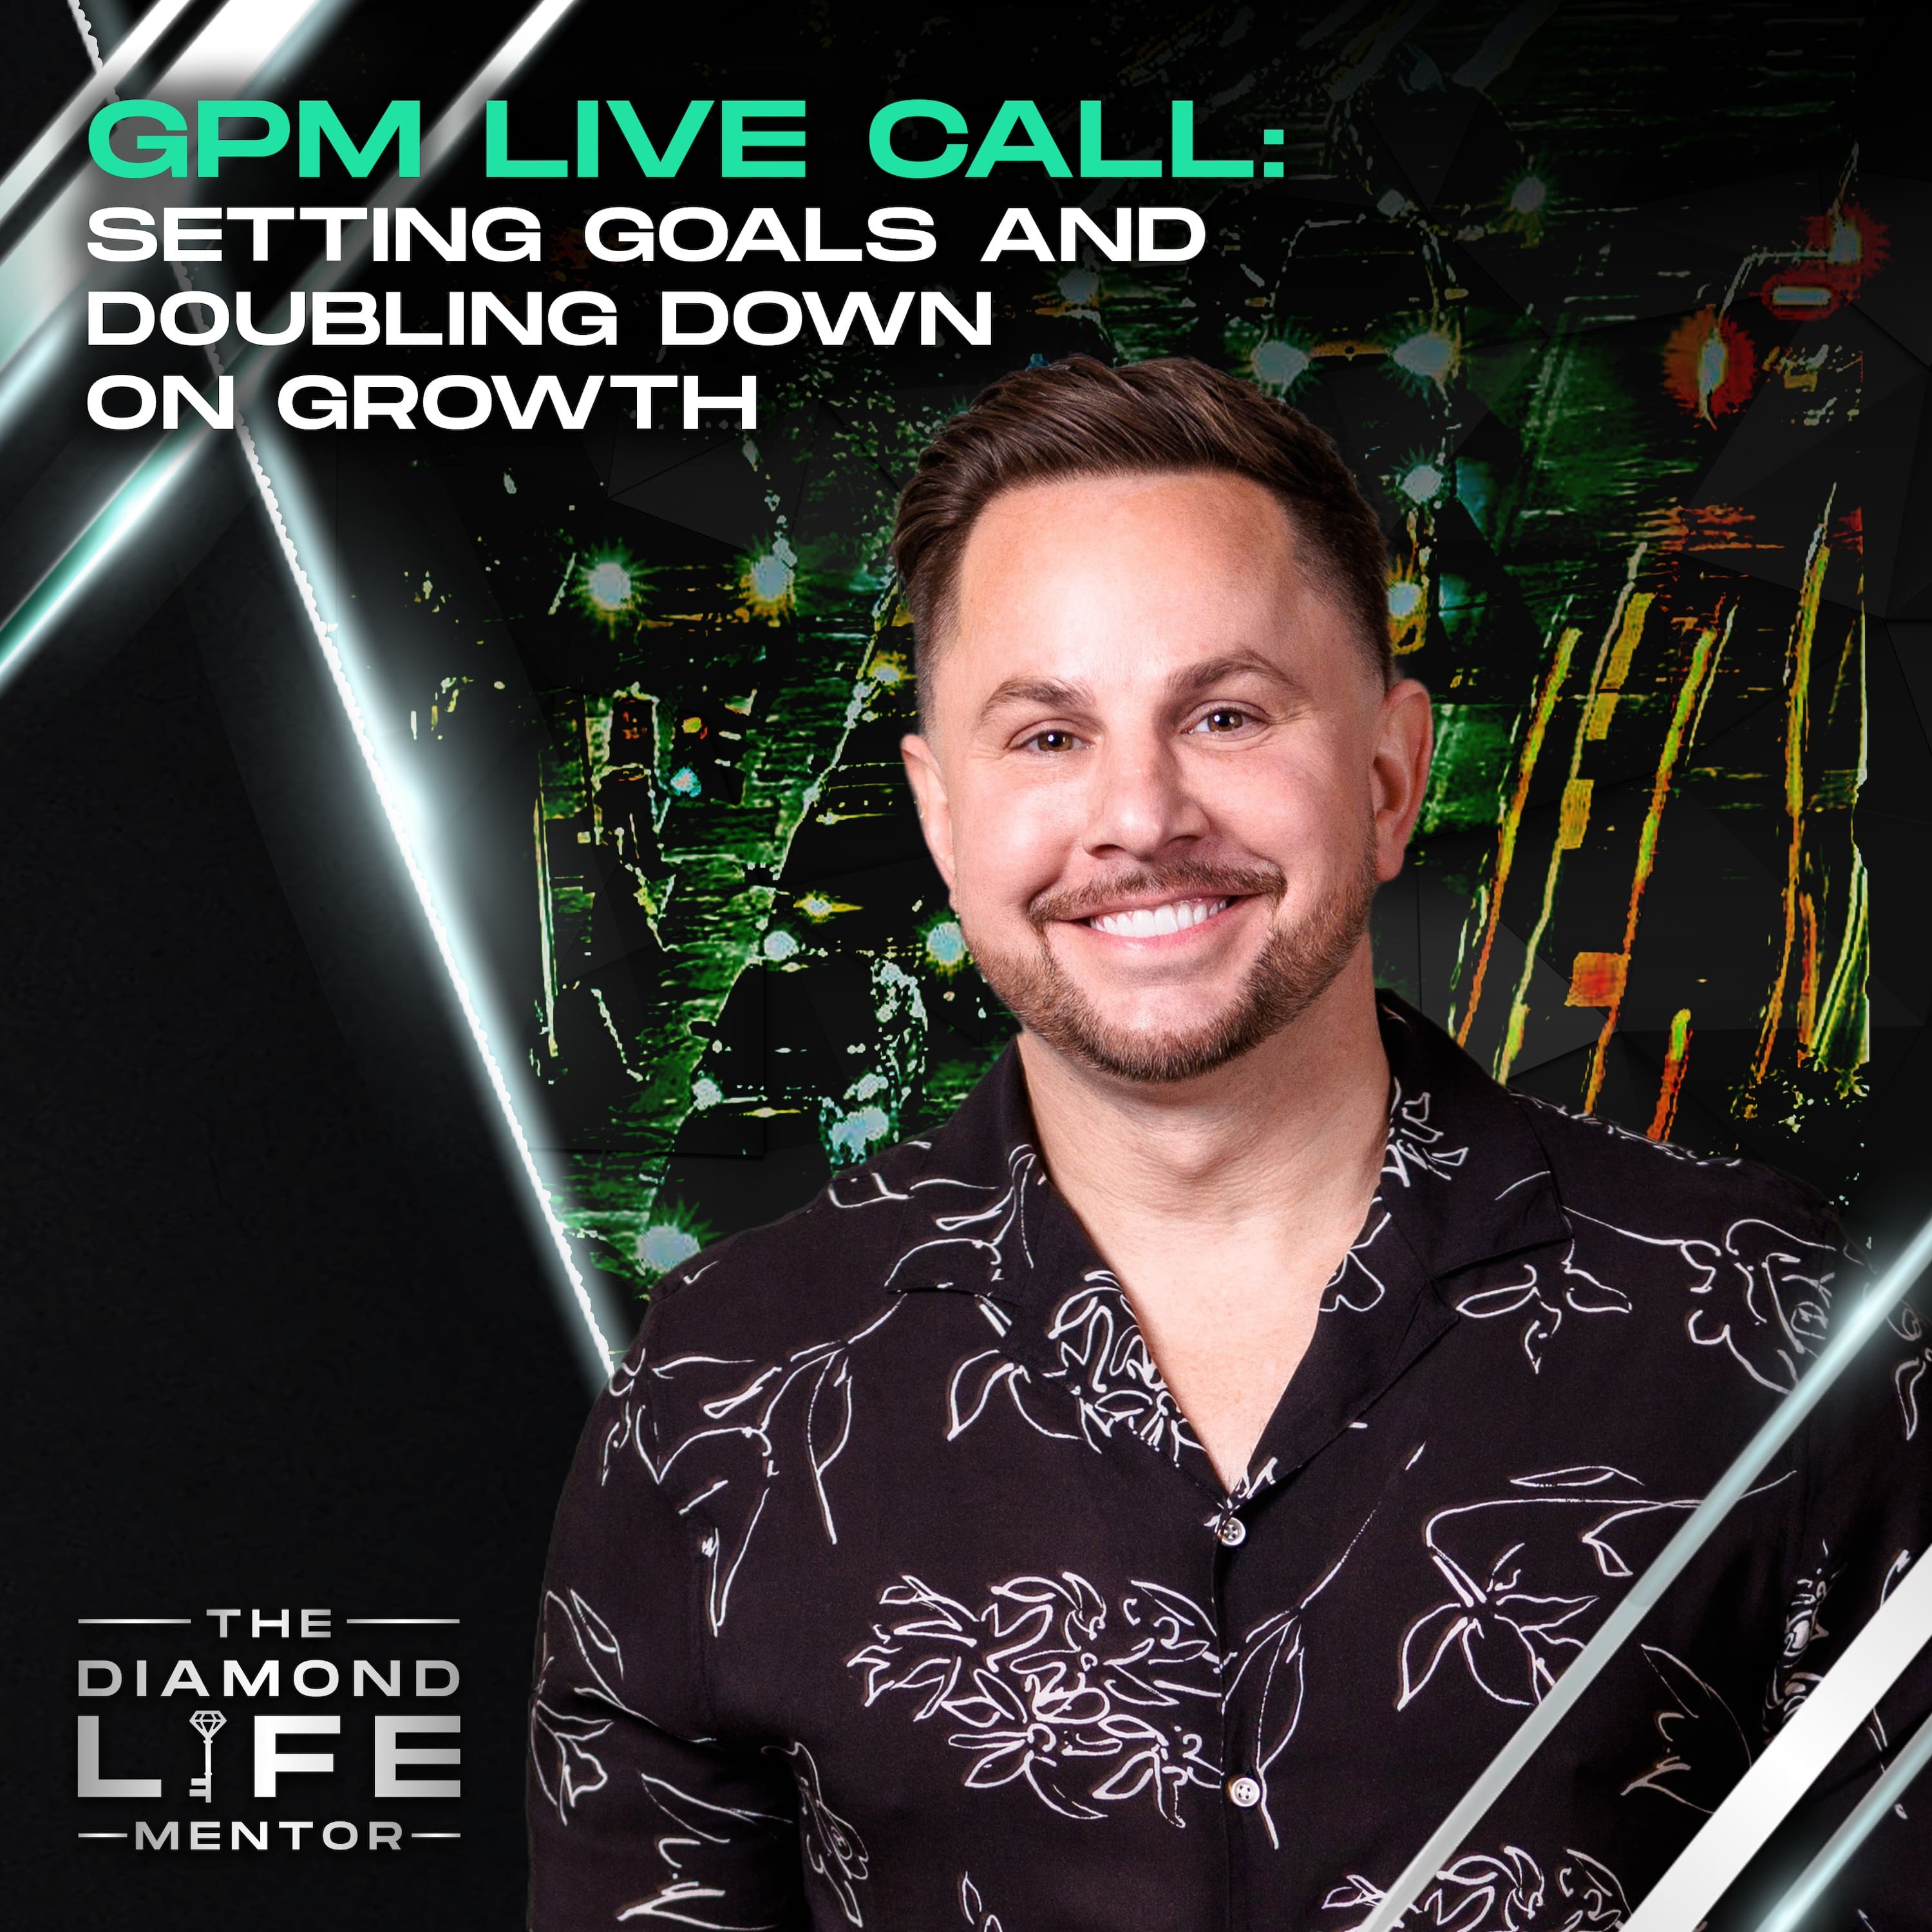 GPM Live Call: Setting Goals and Doubling Down on Growth